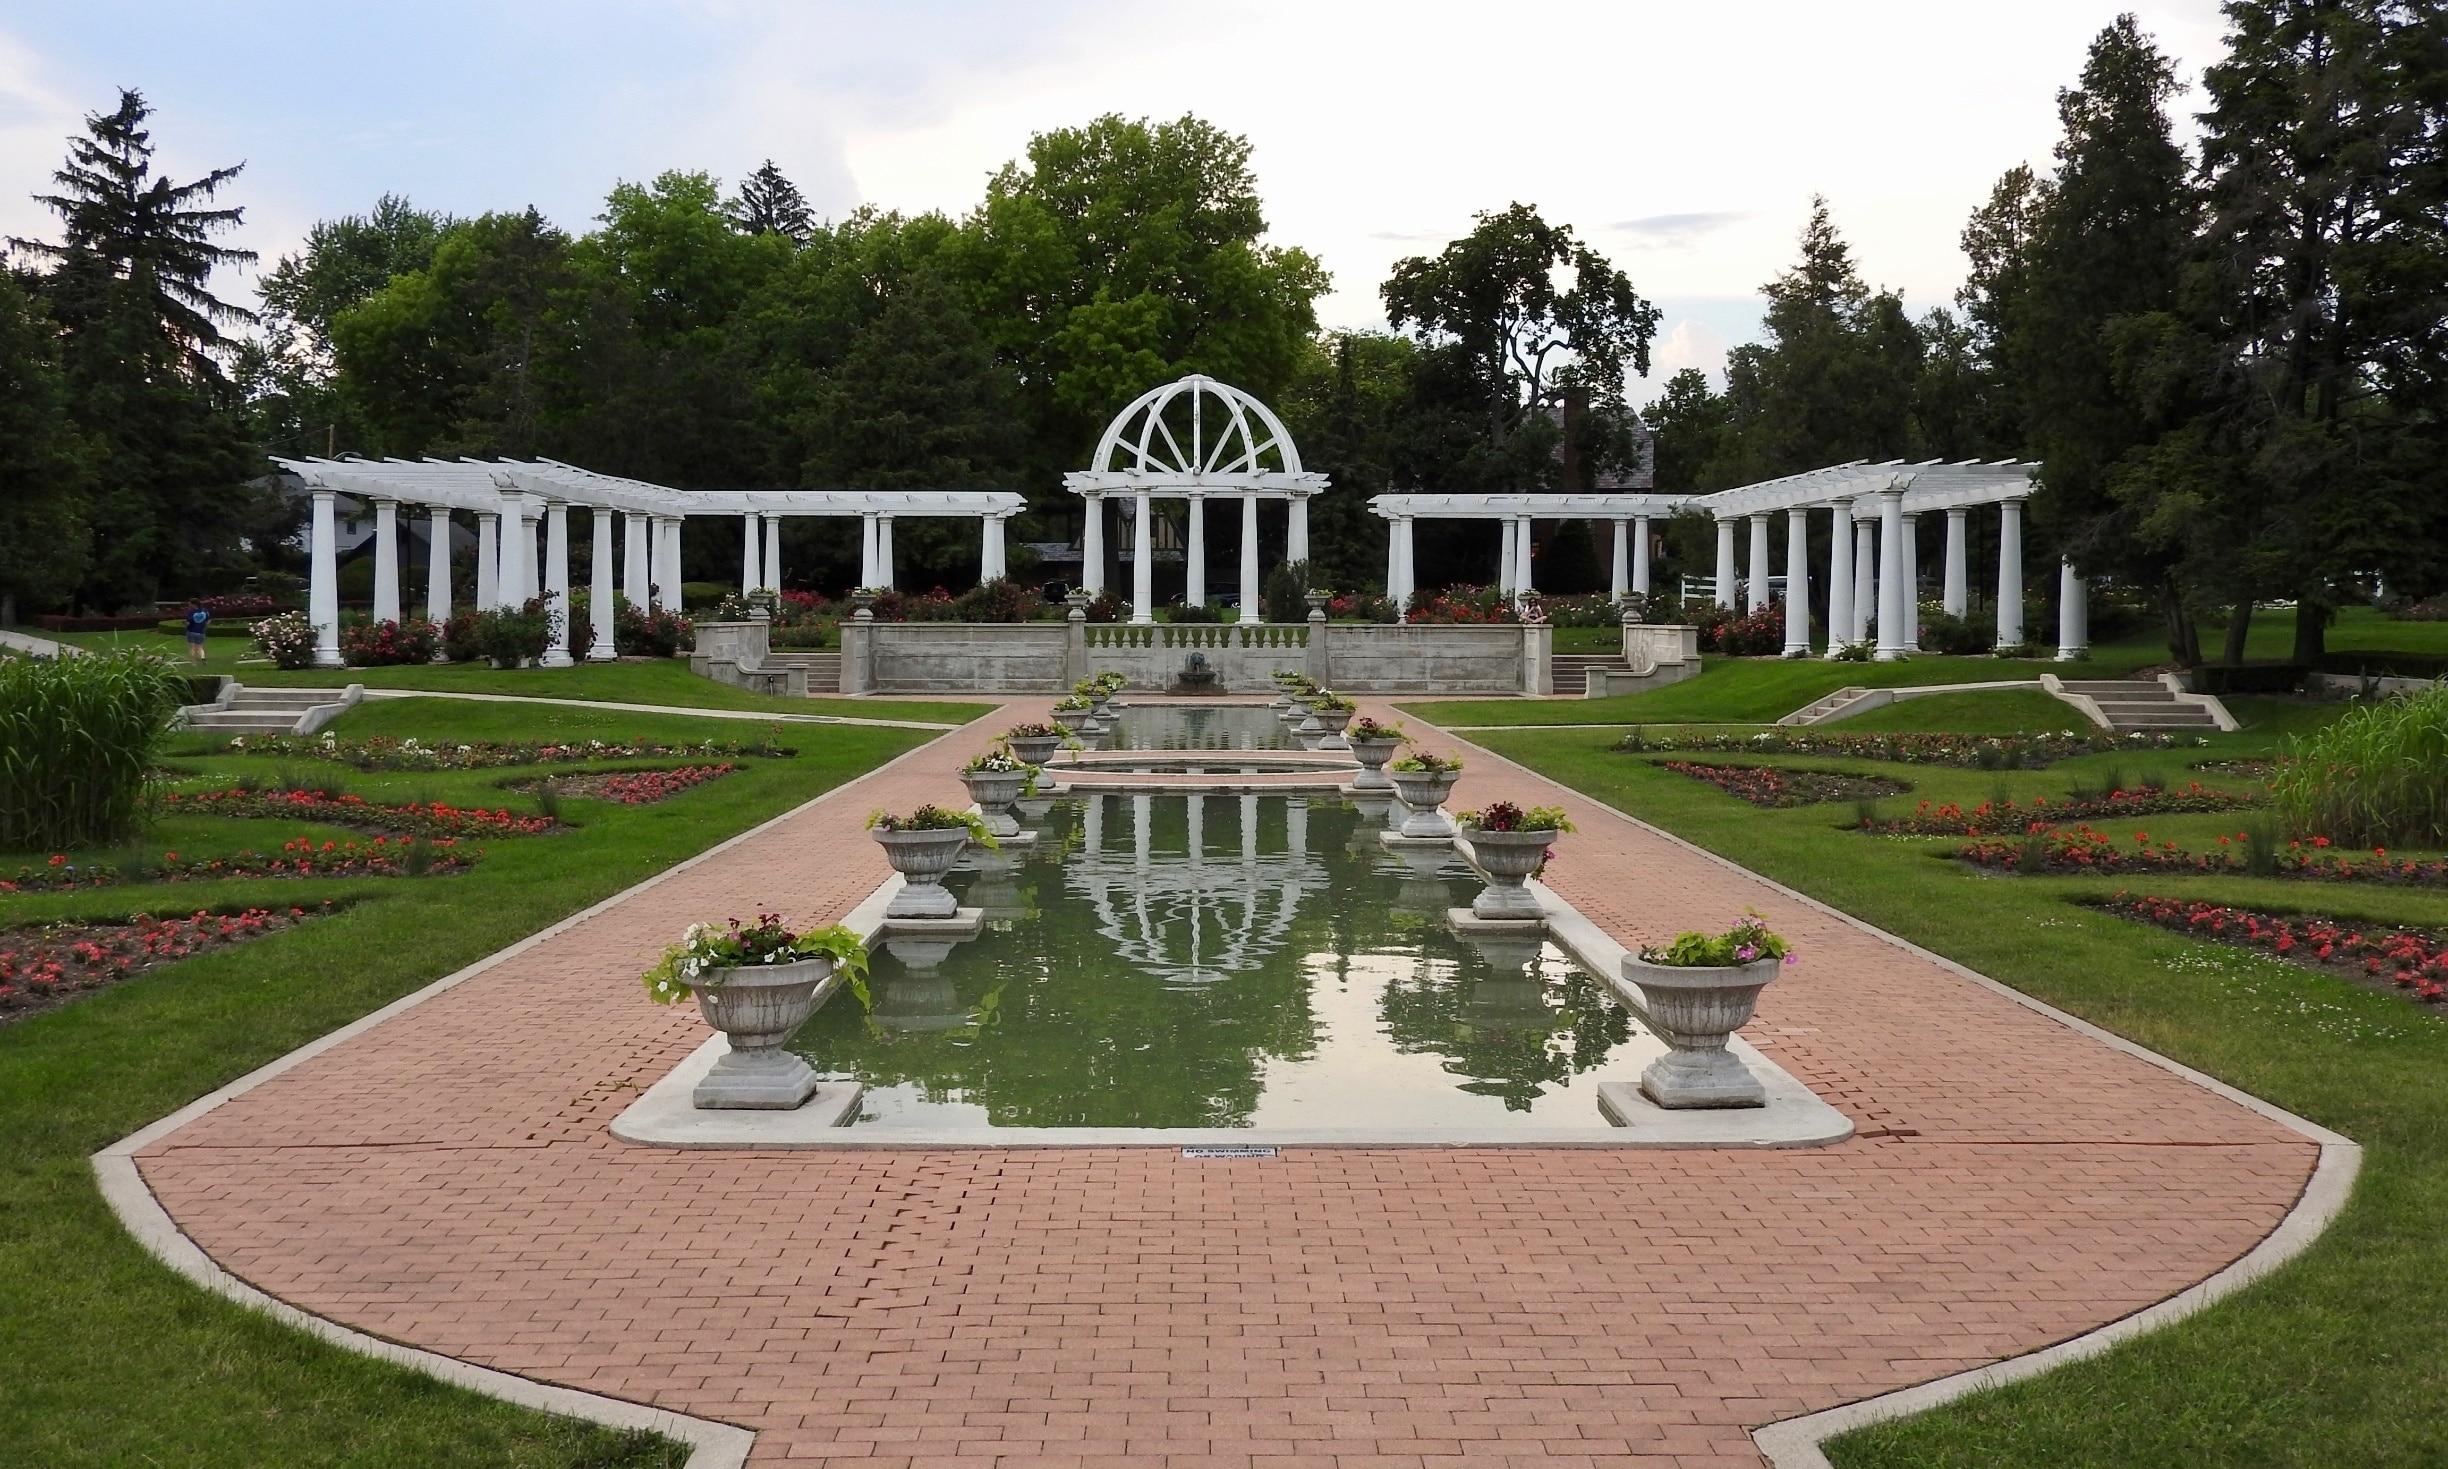 Lakeside park offering sunken gardens with a variety of roses, plus fountains & pavilions.

#LikeALocal